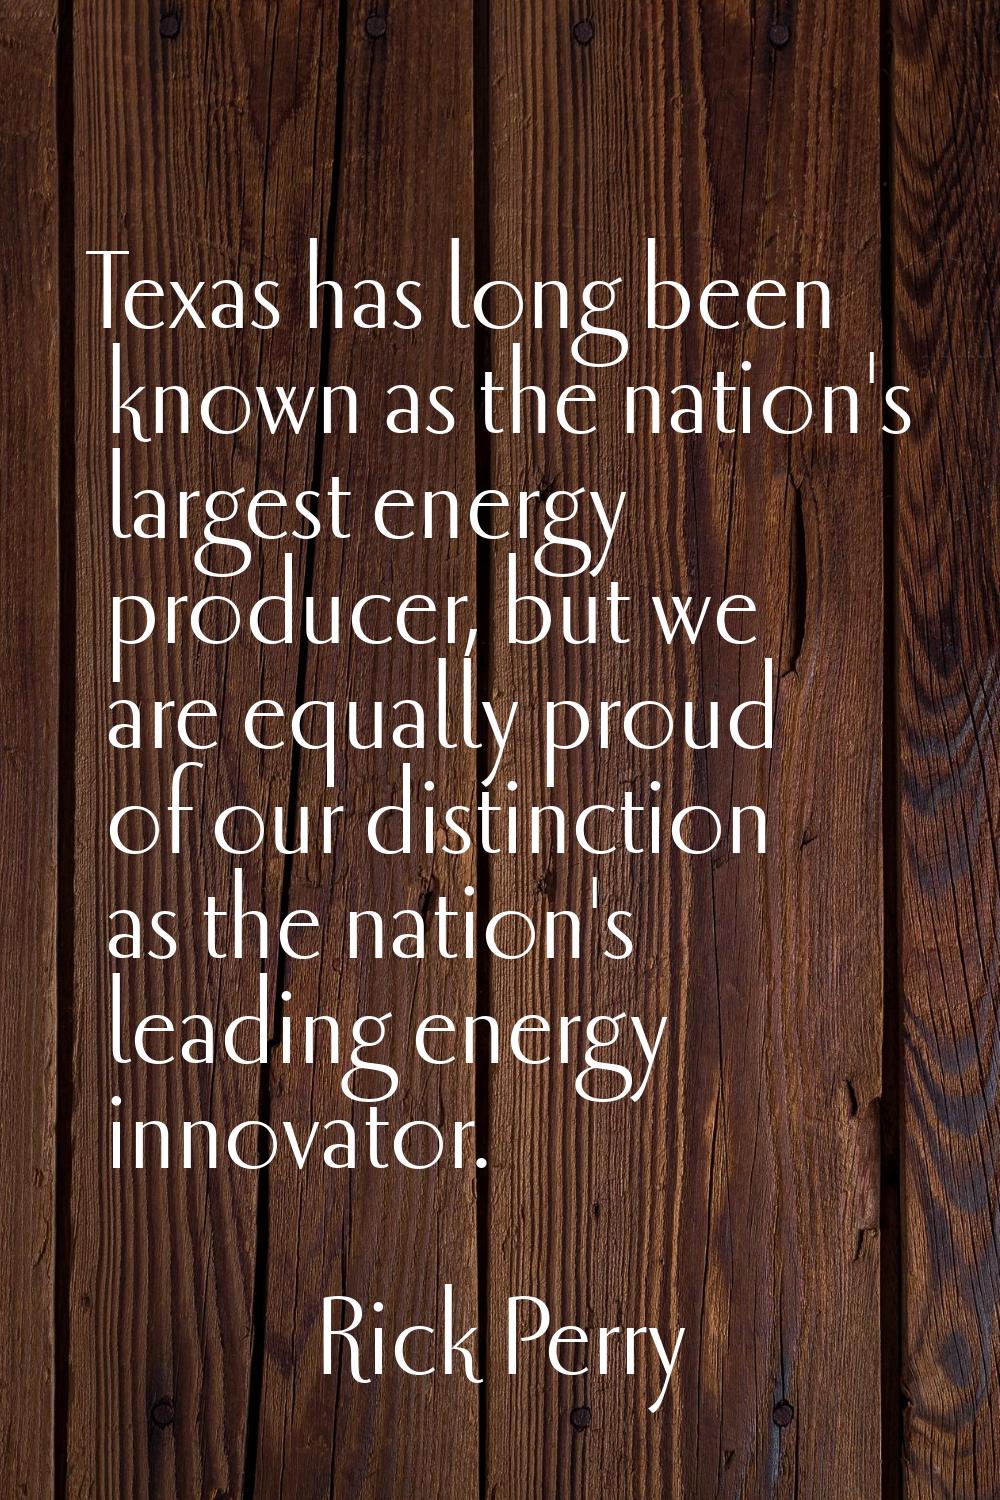 Texas has long been known as the nation's largest energy producer, but we are equally proud of our 